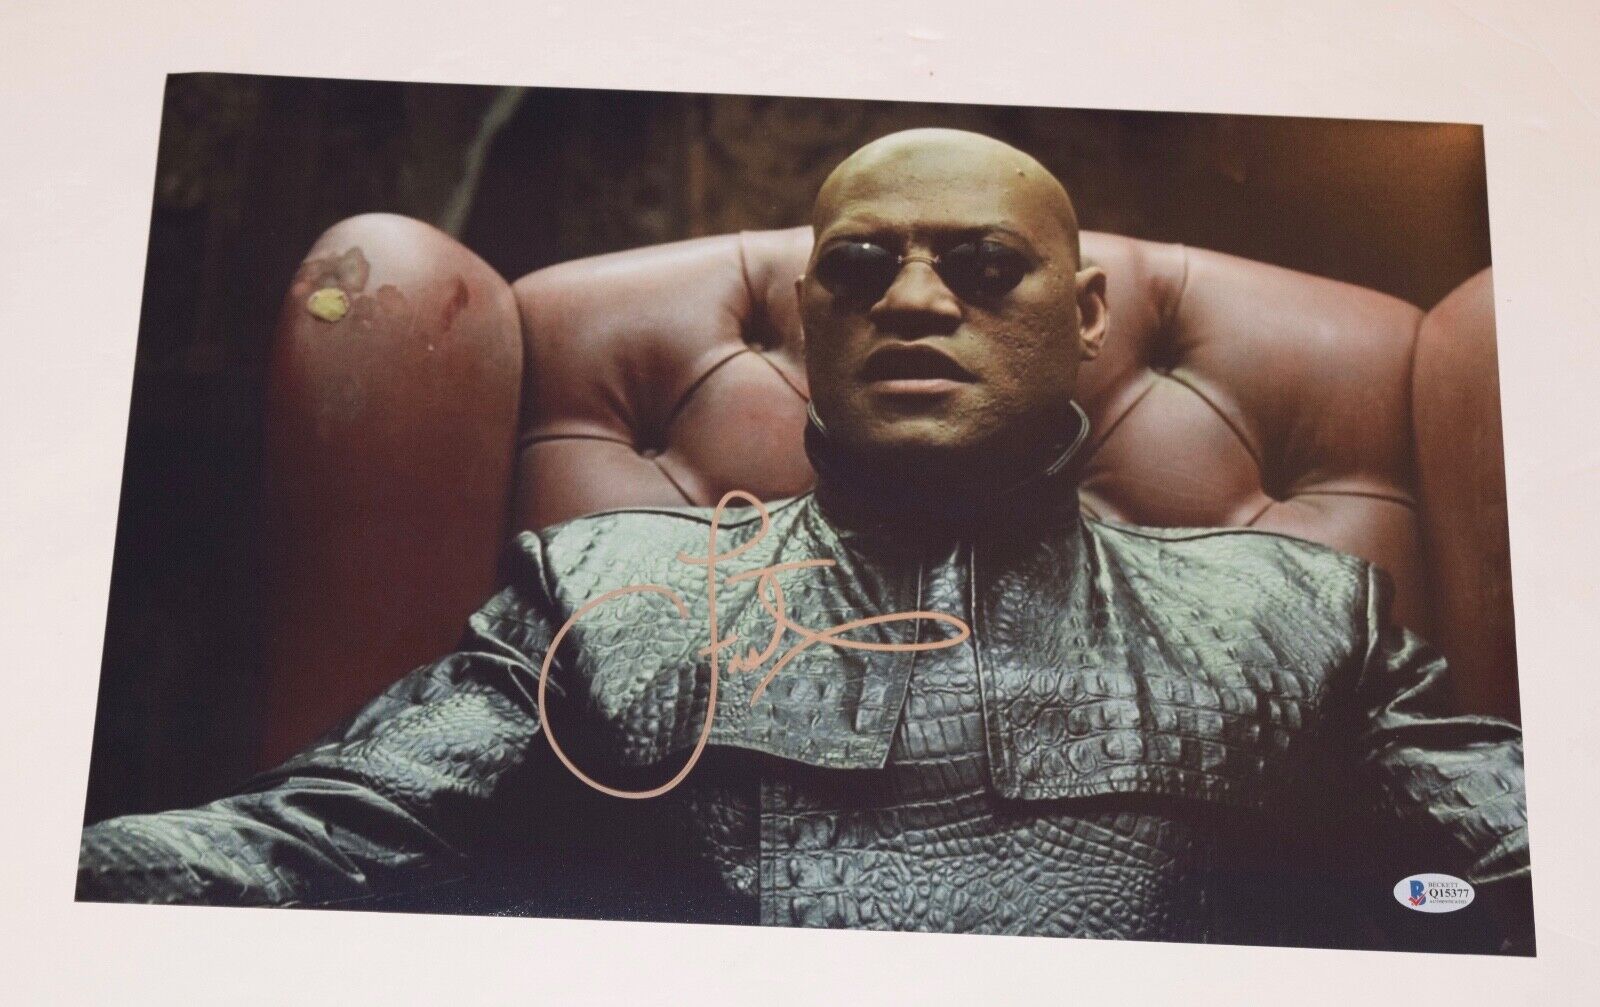 Laurence Fishburne Signed Autographed 12x18 Poster Photo Poster painting THE MATRIX Beckett COA